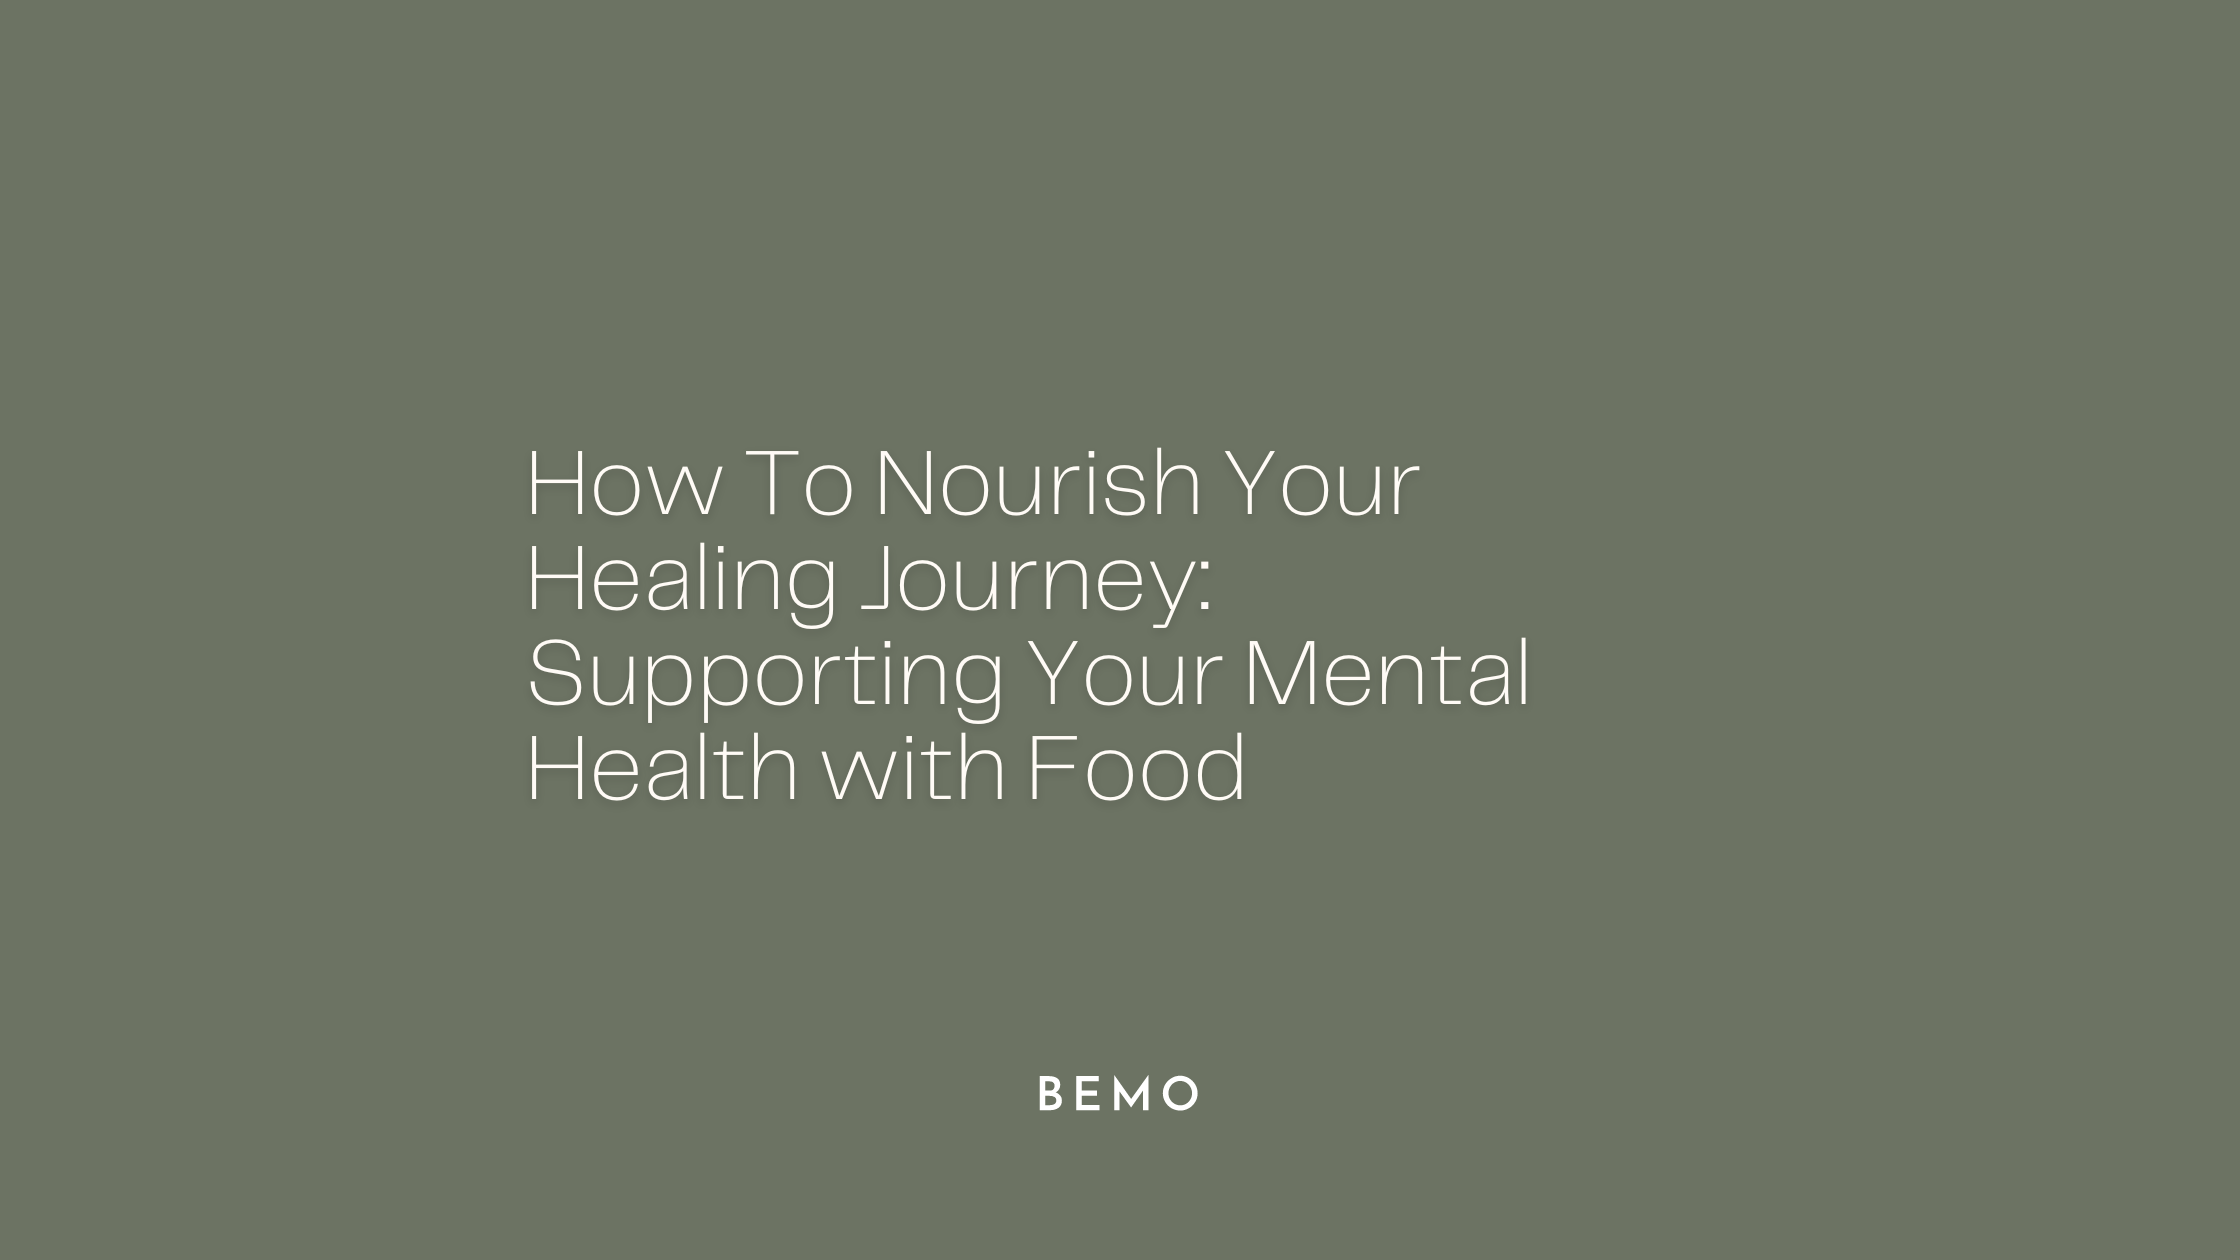 How To Nourish Your Healing Journey: Supporting Your Mental Health with Food